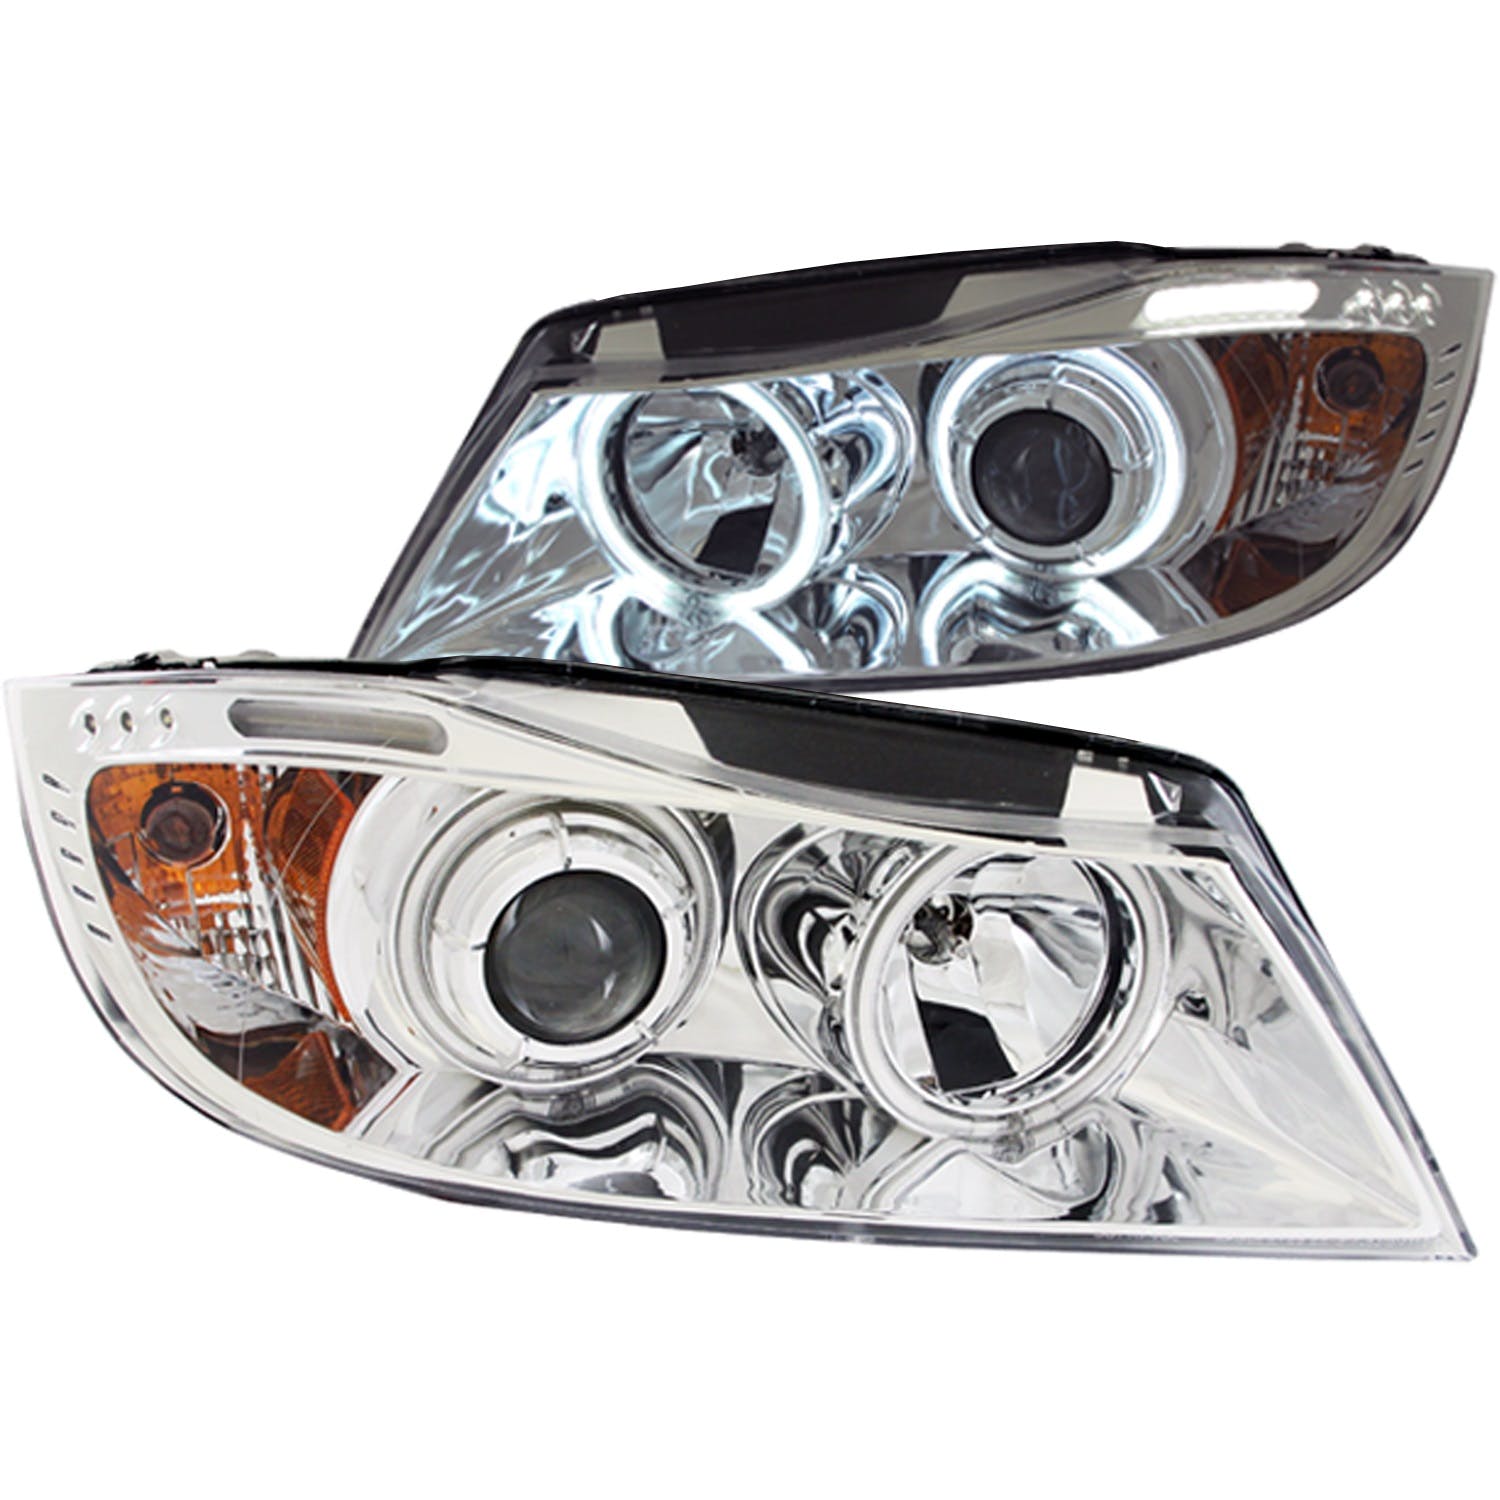 AnzoUSA 121336 Projector Headlights with Halo with LED Bar Chrome (SMD LED)